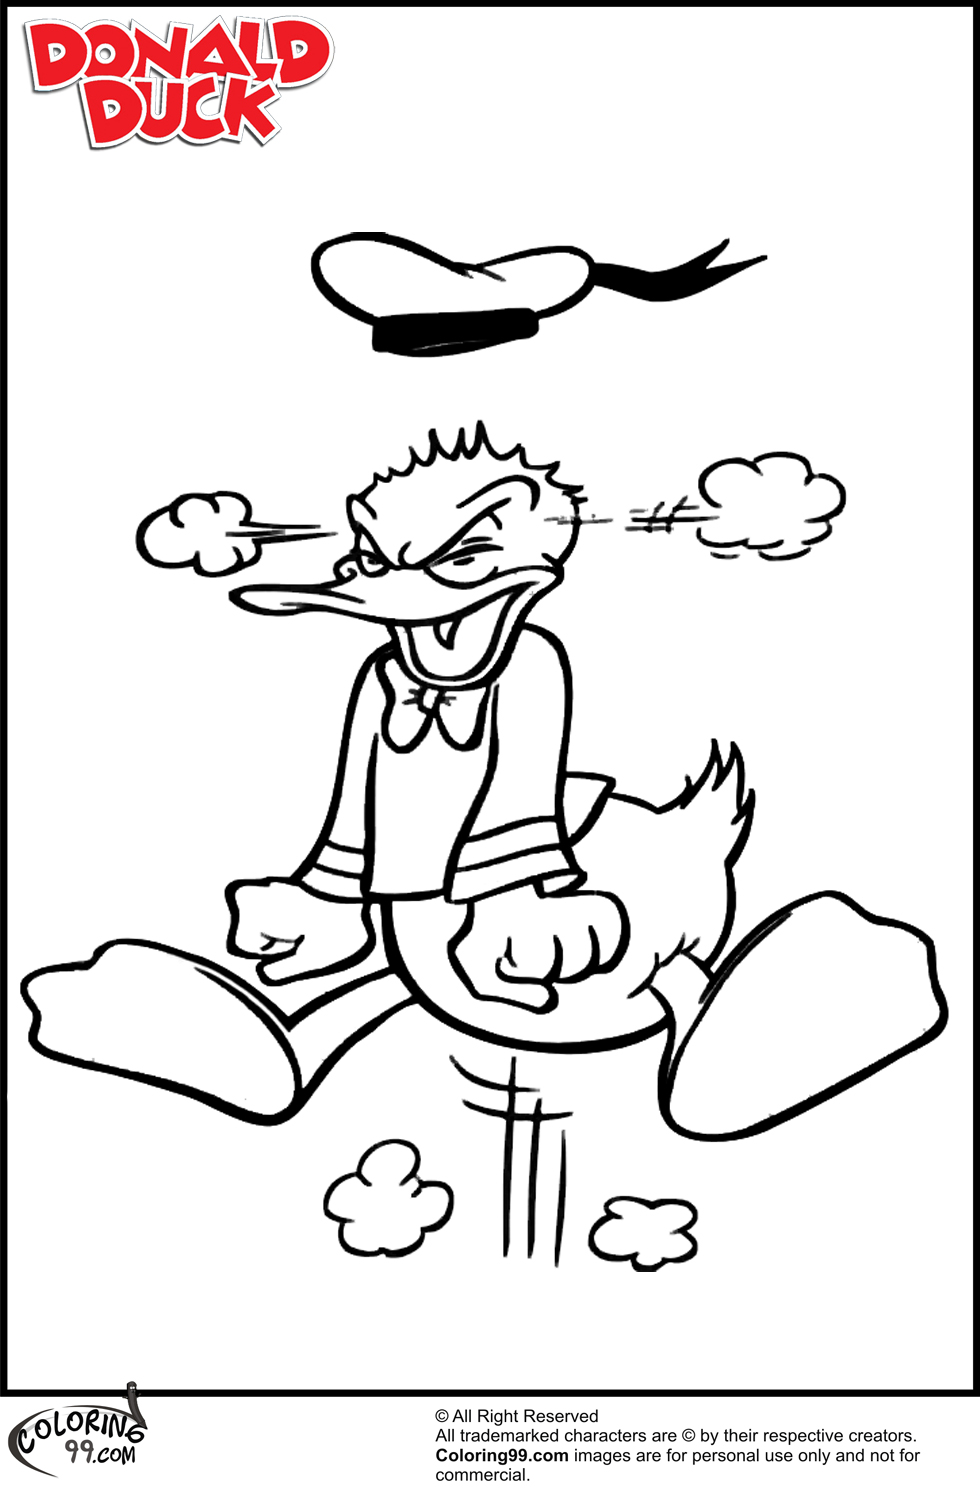 Download Donald Duck Coloring Pages | Team colors